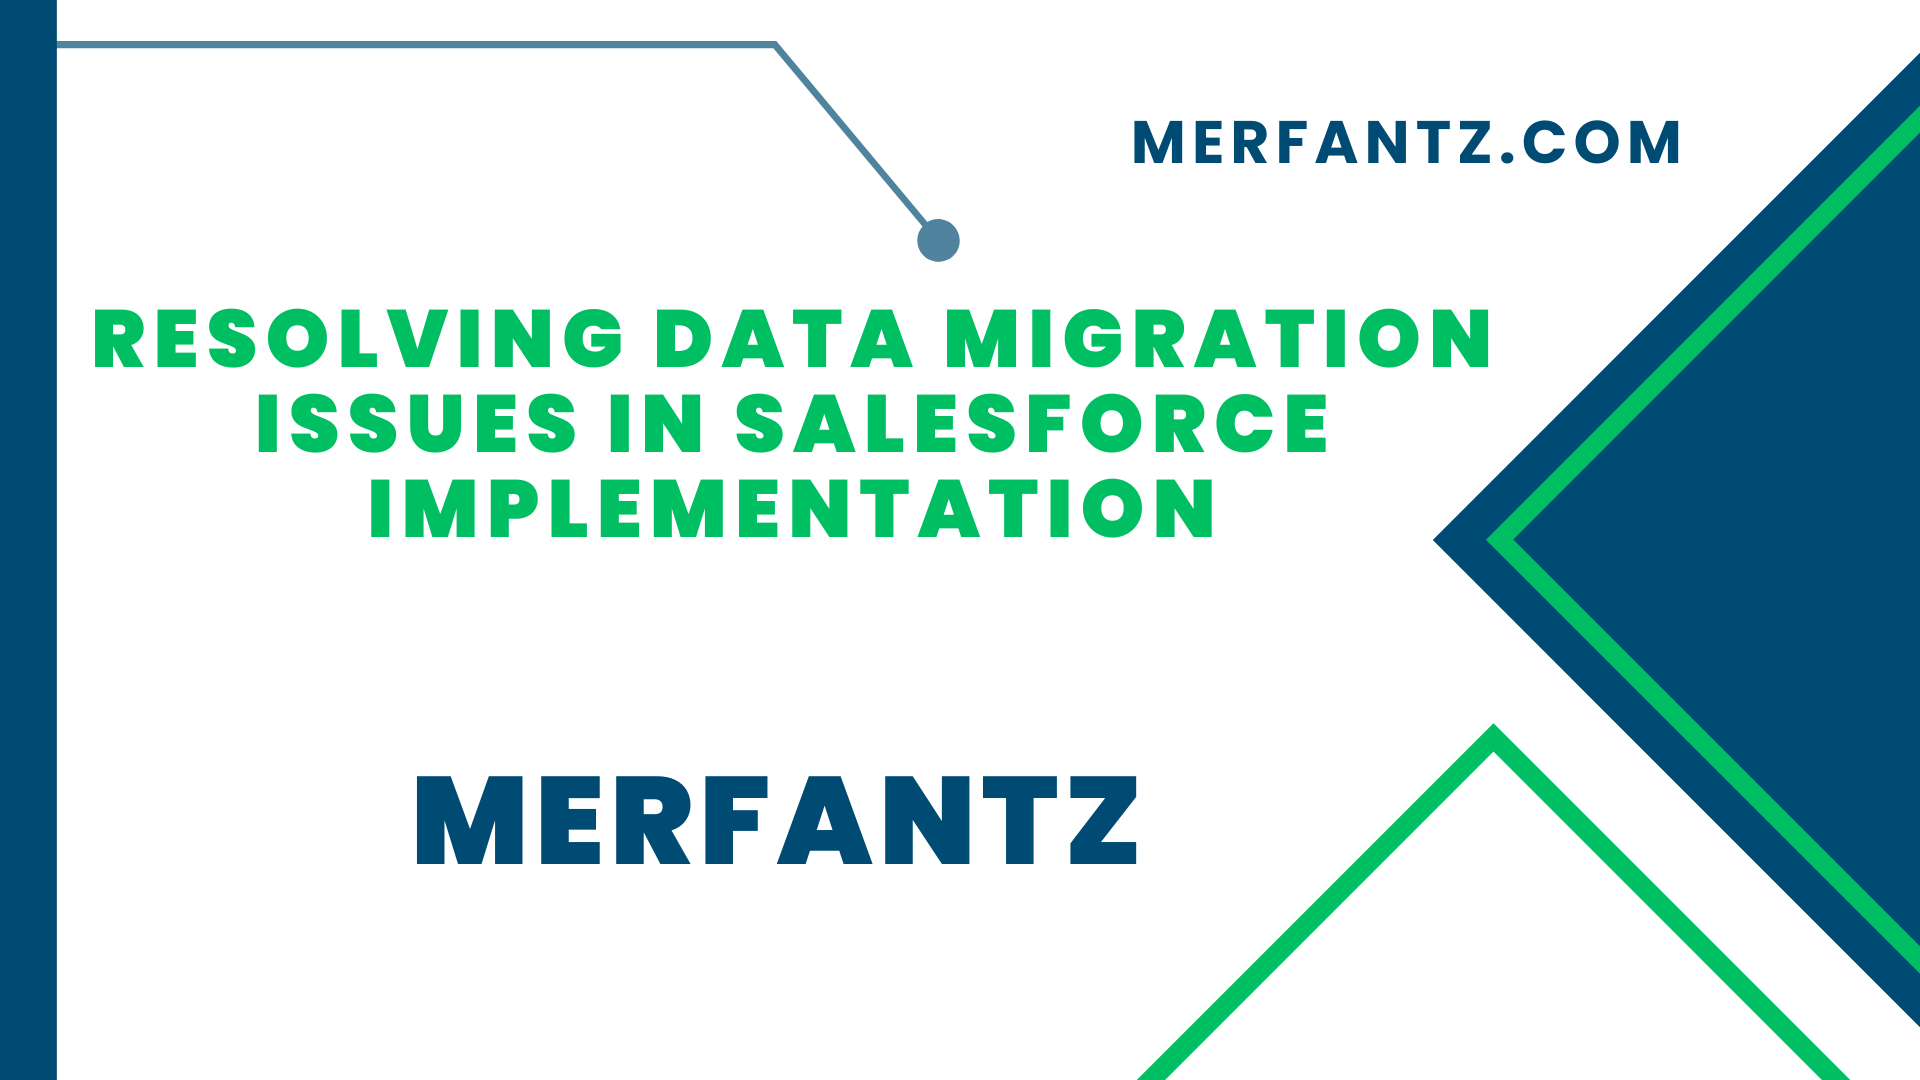 Resolving Data Migration Issues in Salesforce Implementation